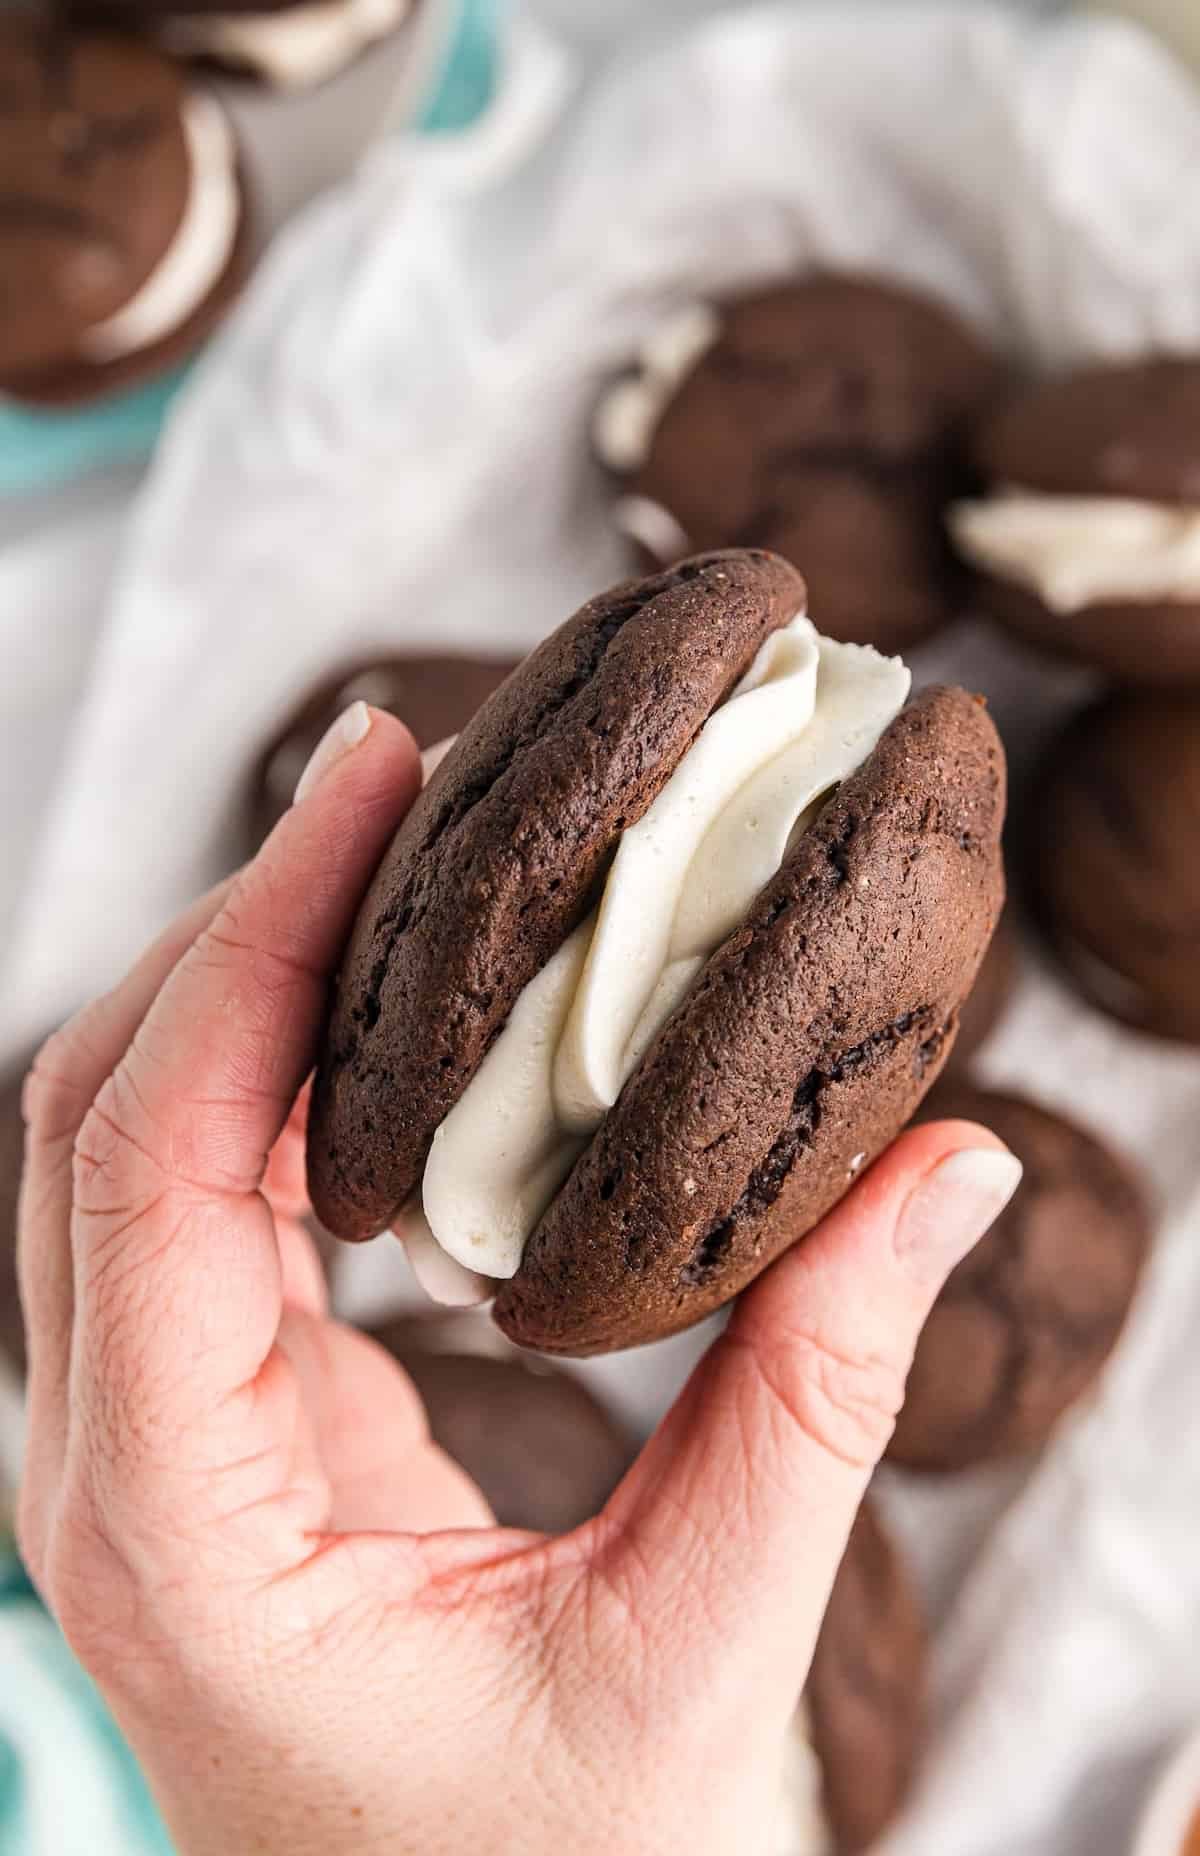 A hand holding a chocolate whoopie pie.